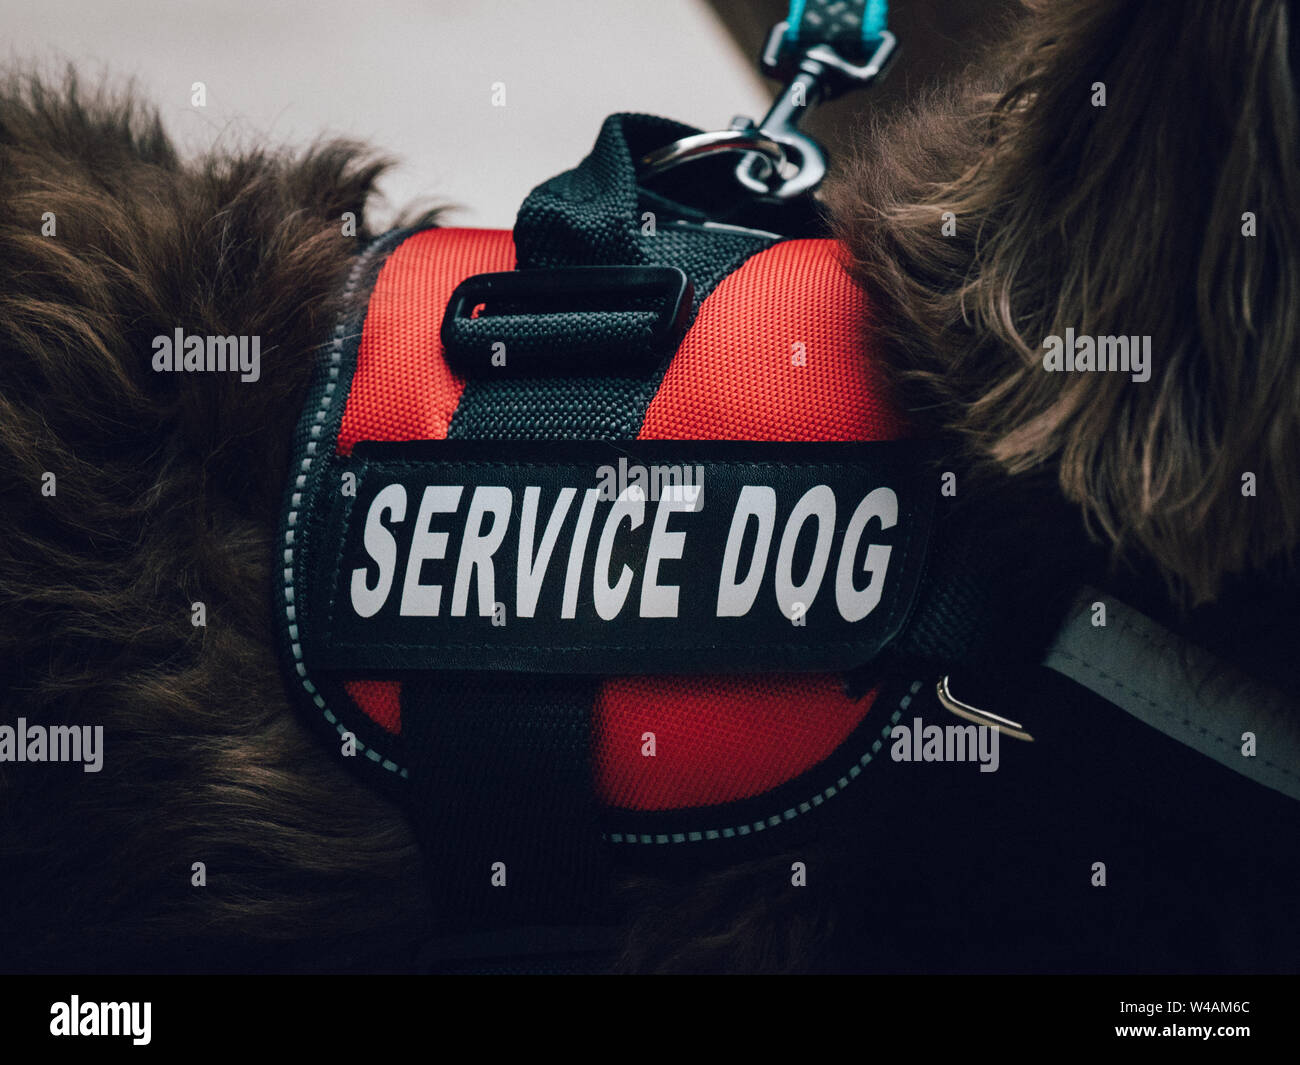 A red service dog vest on a long haired dachshund. Stock Photo